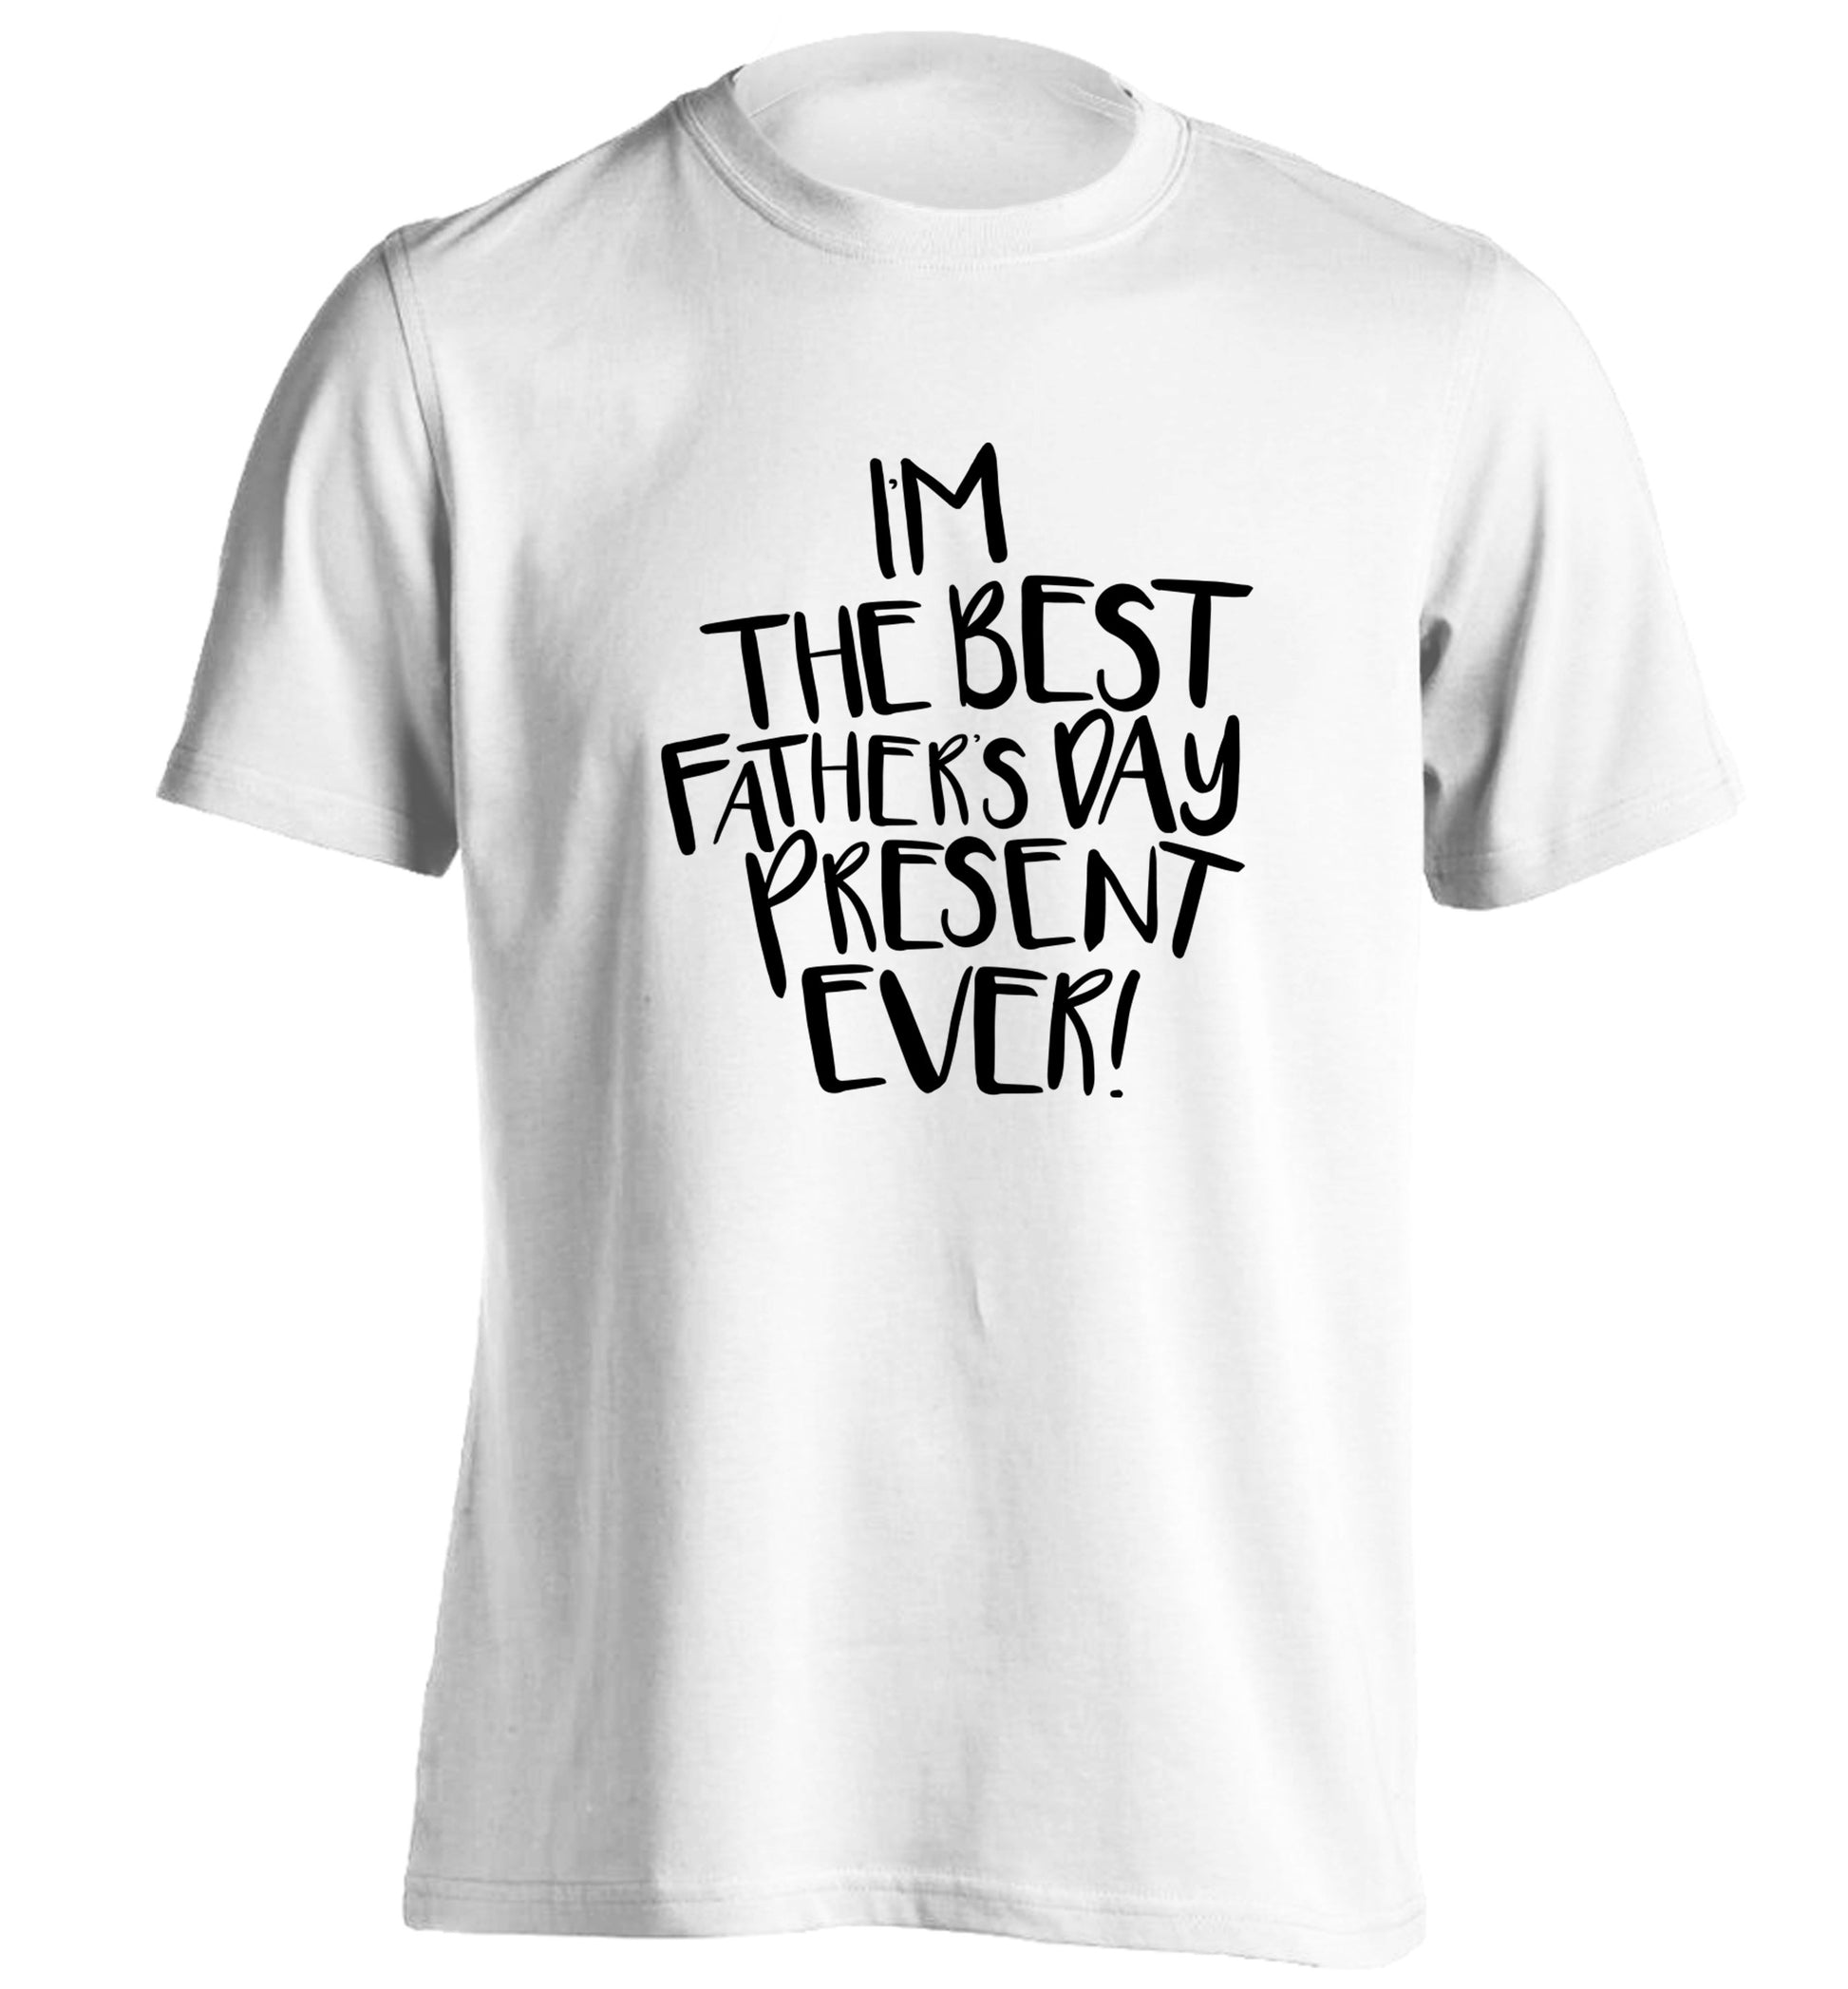 I'm the best father's day present ever! adults unisex white Tshirt 2XL